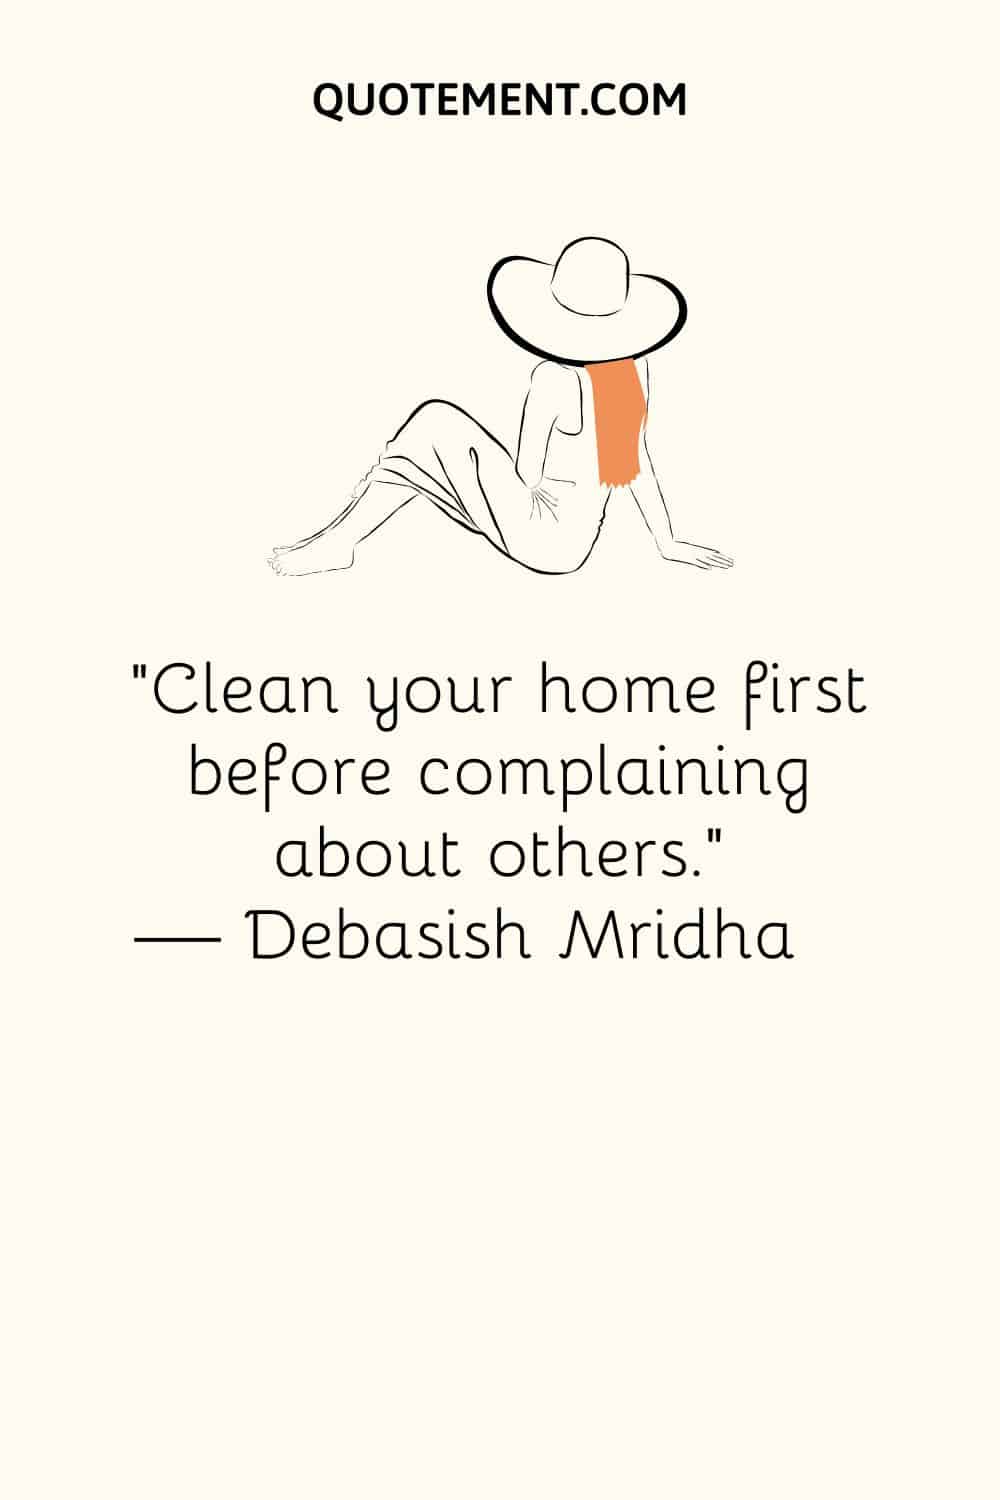 Clean your home first before complaining about others